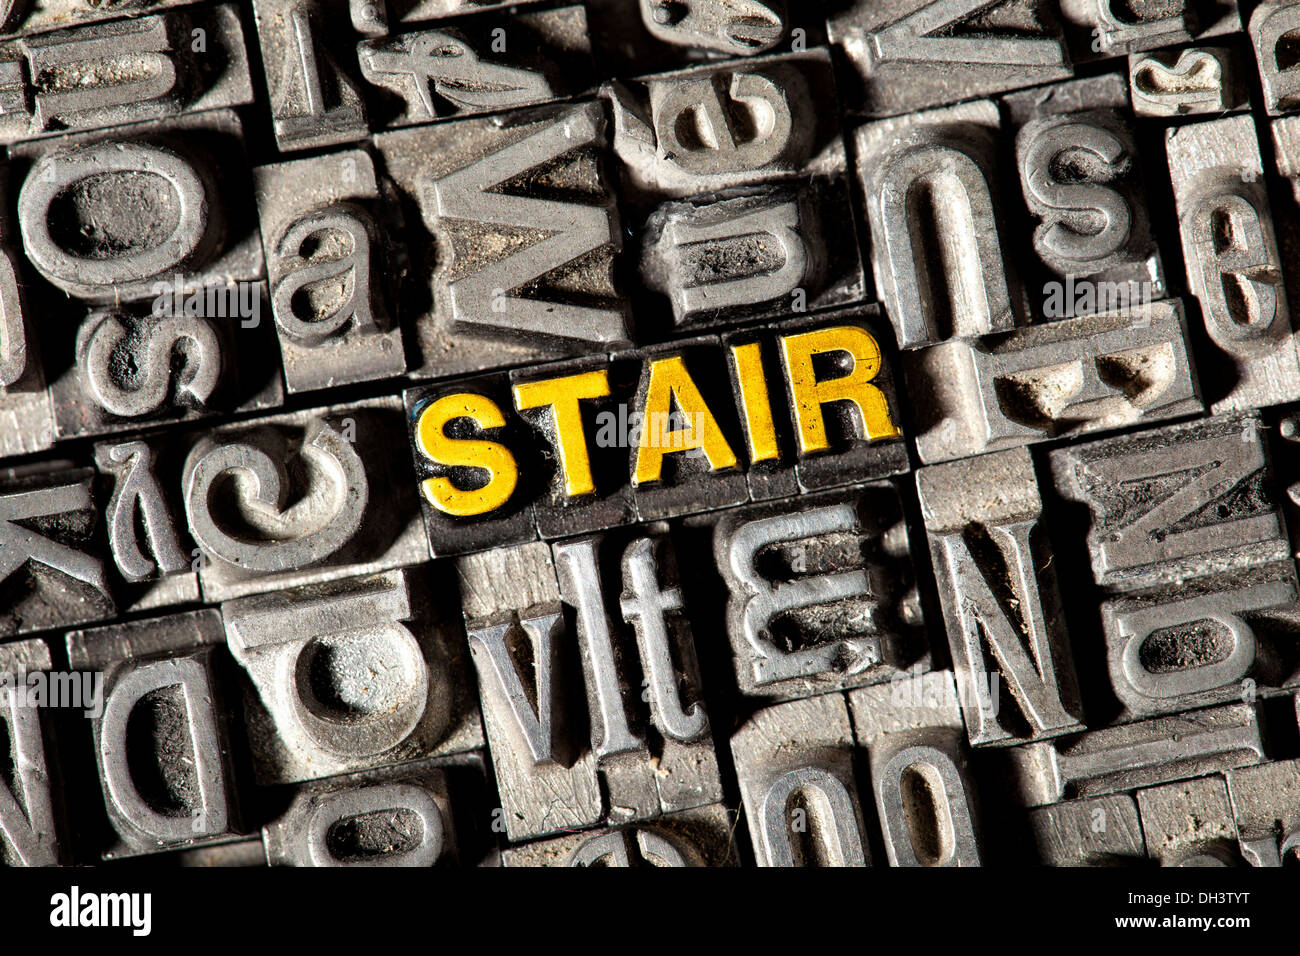 Old lead letters forming the word 'STAIR' Stock Photo